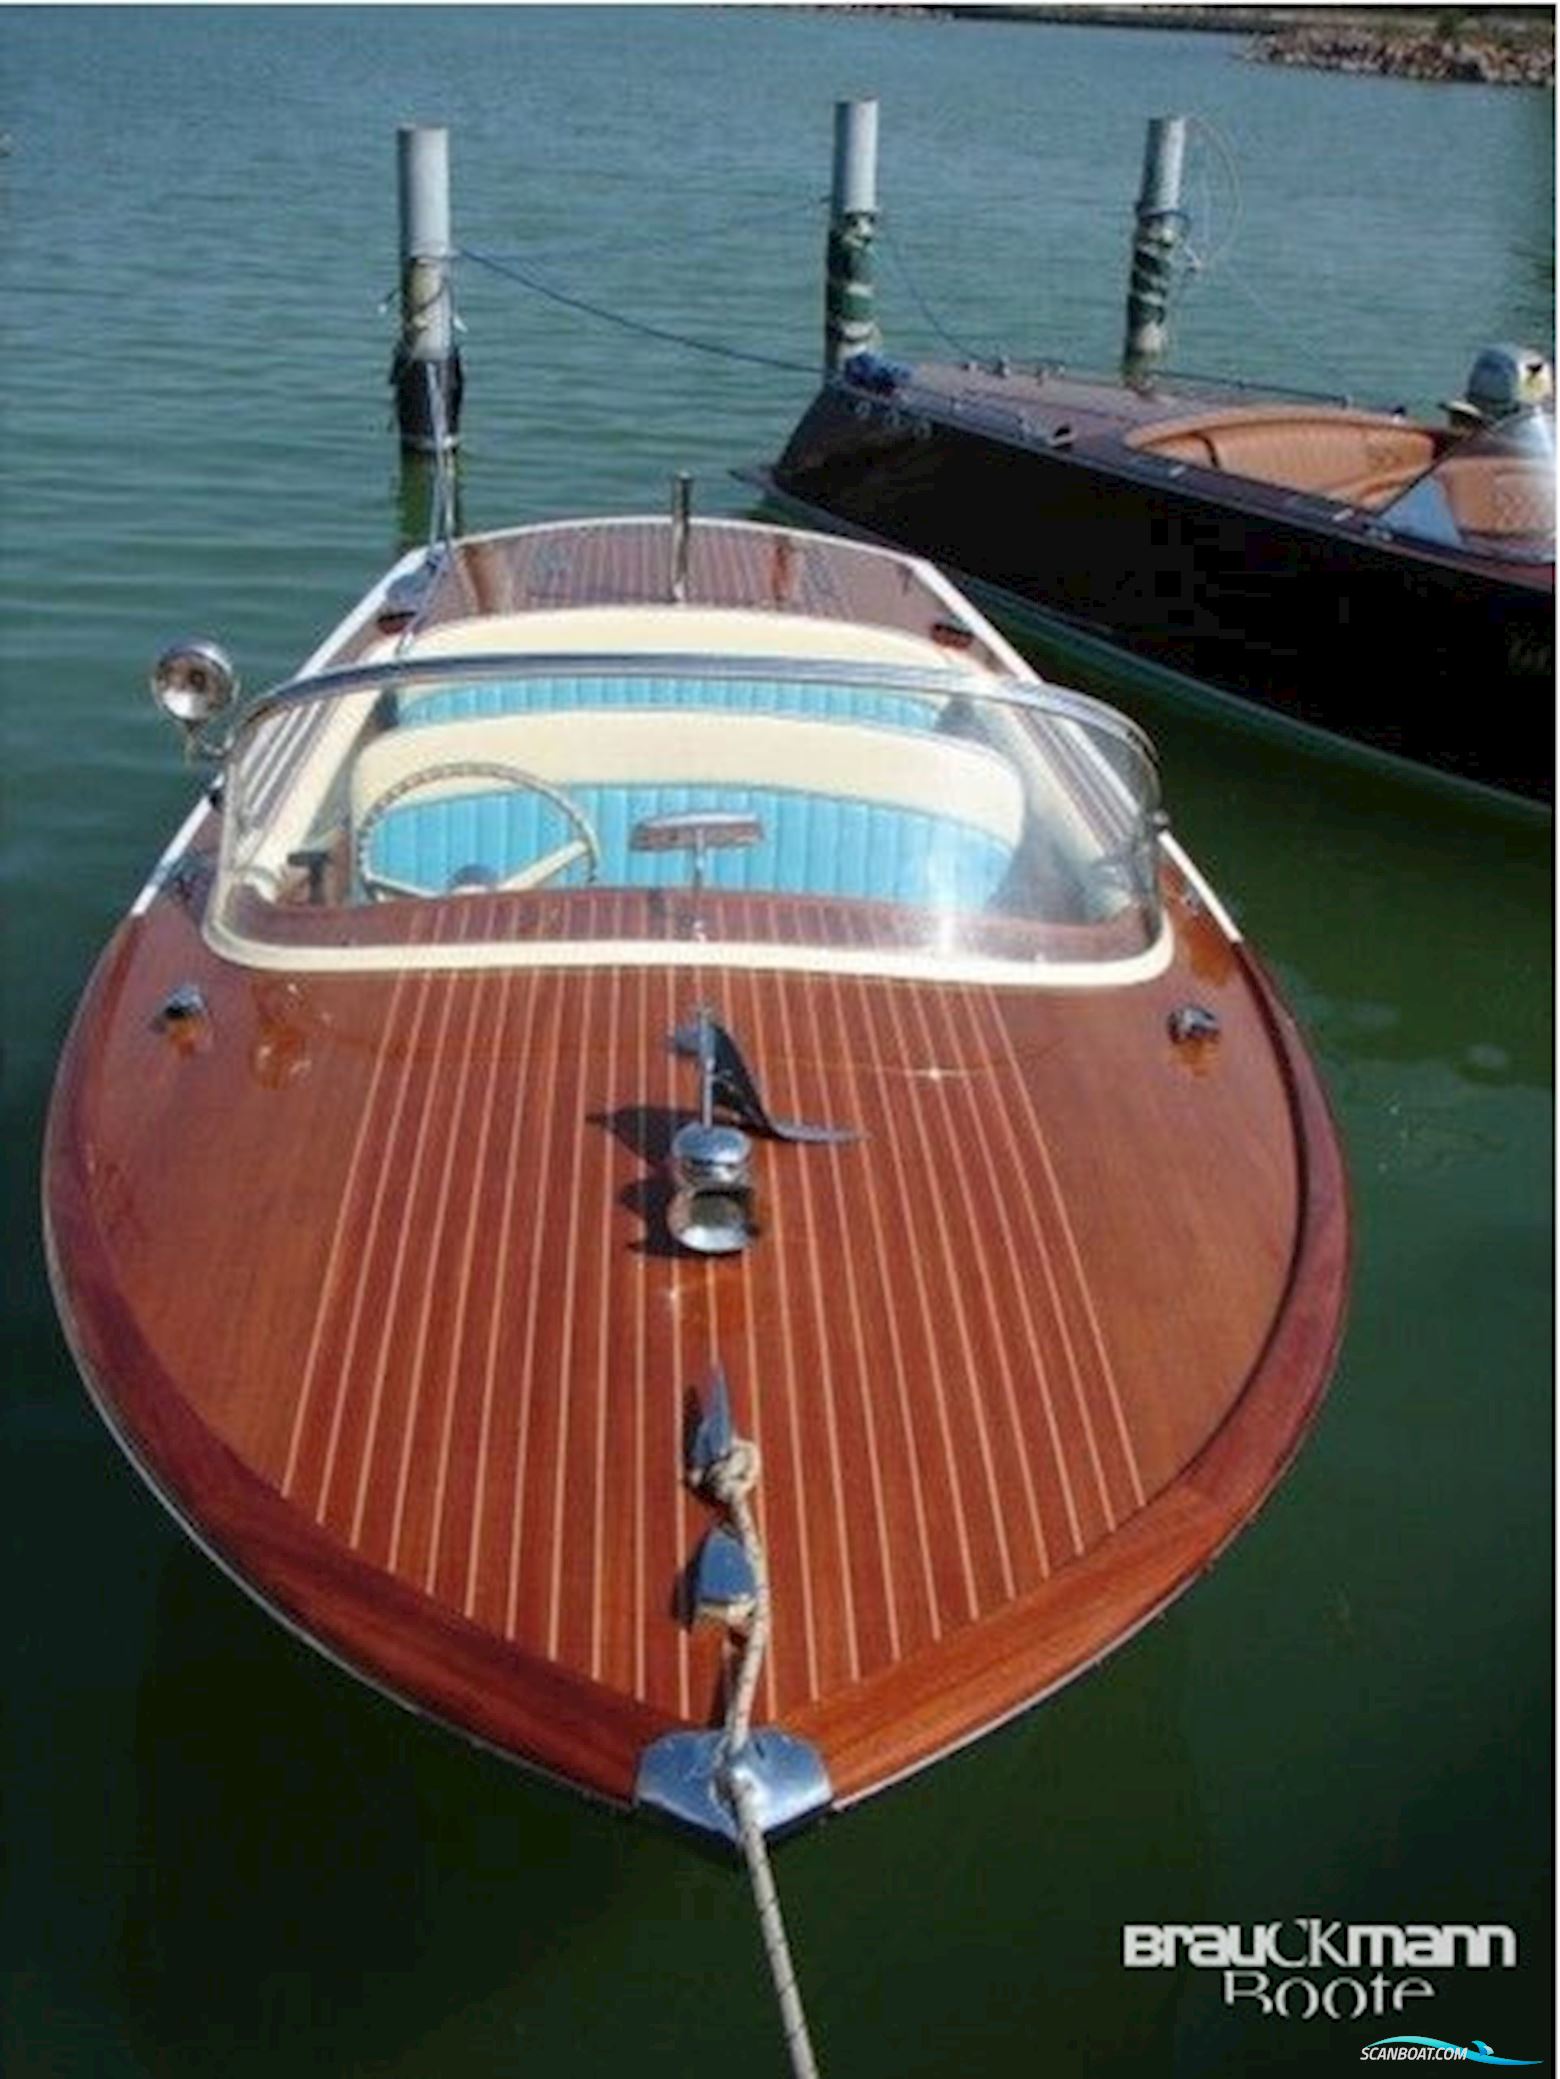 Colombo Super Indios 18 Motor boat 1969, with Mercruiser engine, Italy